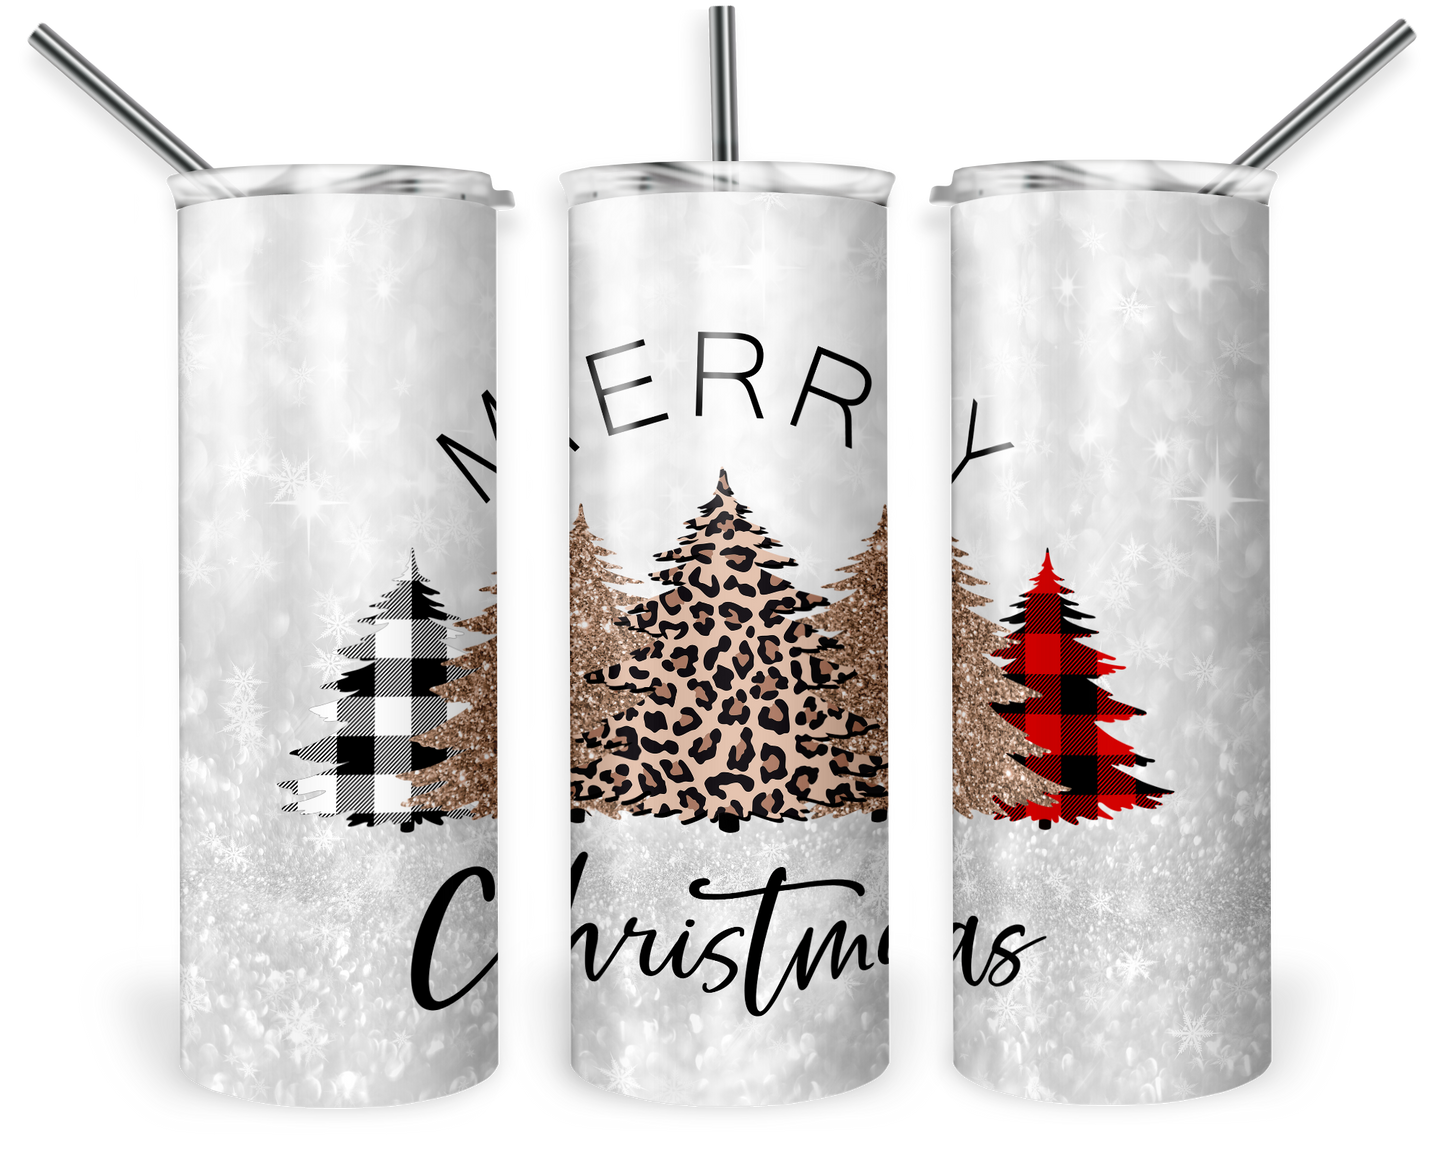 20 oz. Tumbler customized with your design